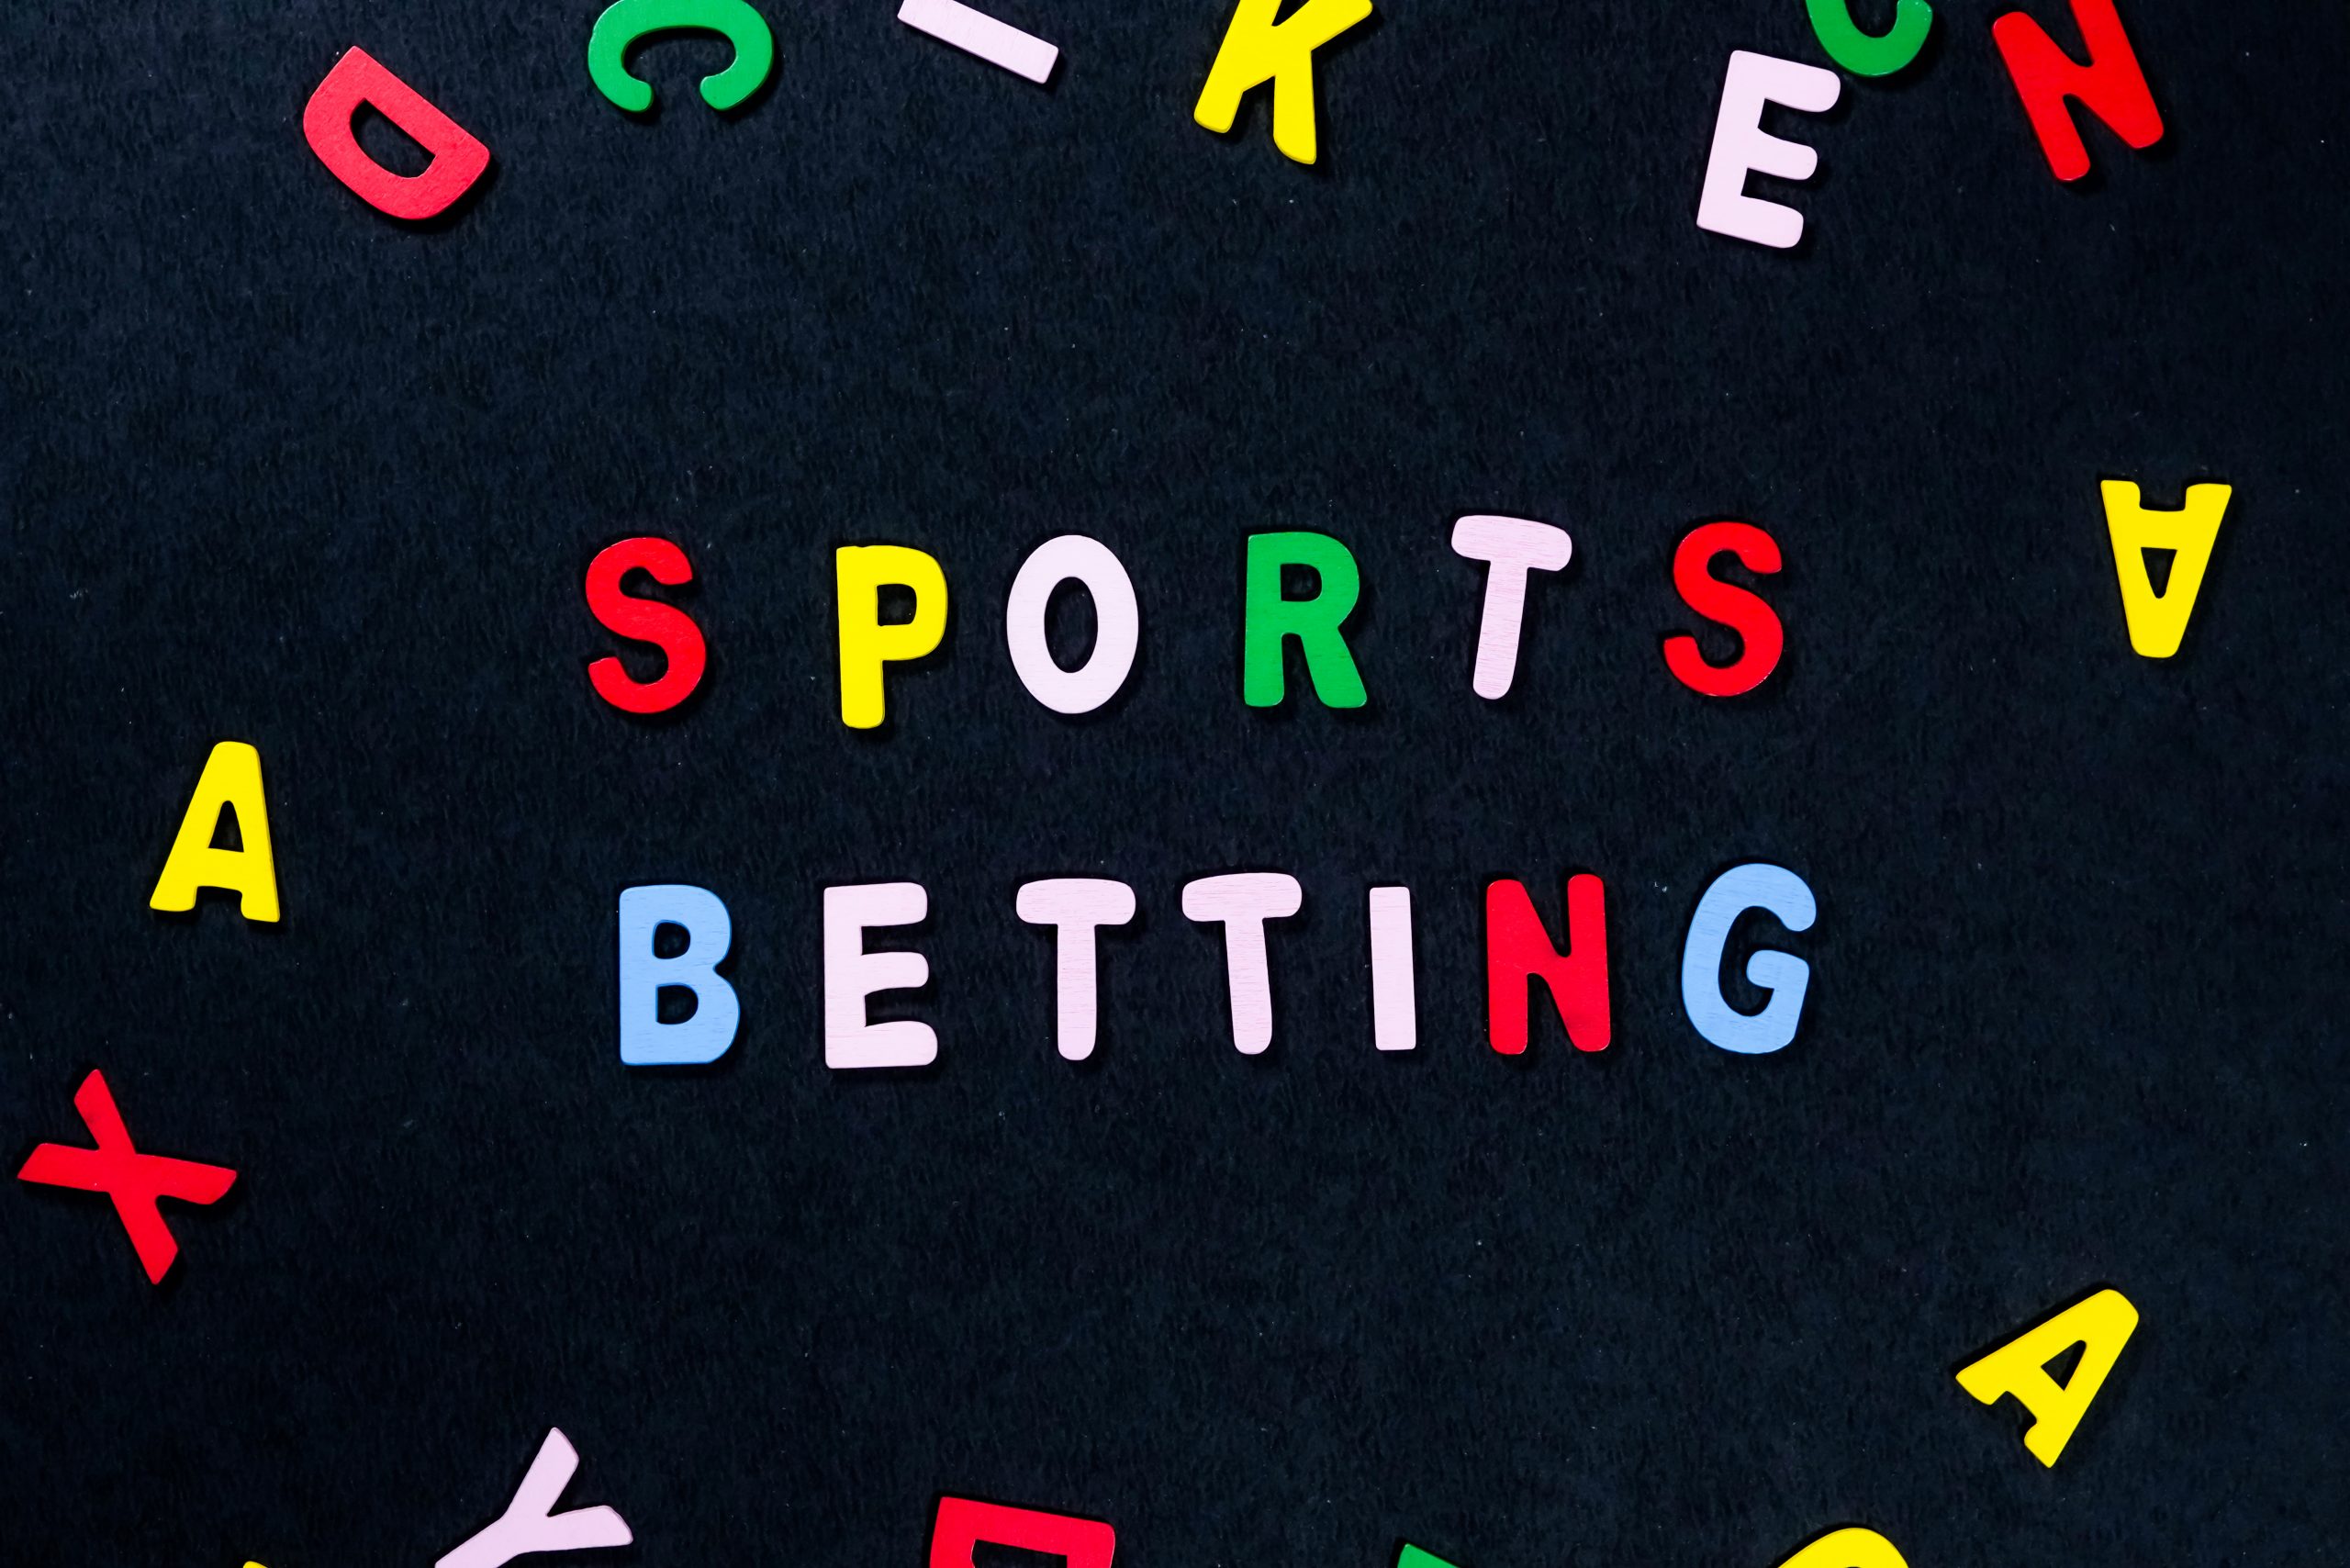 “Sports Betting 101: Getting Started with Winning Bets”